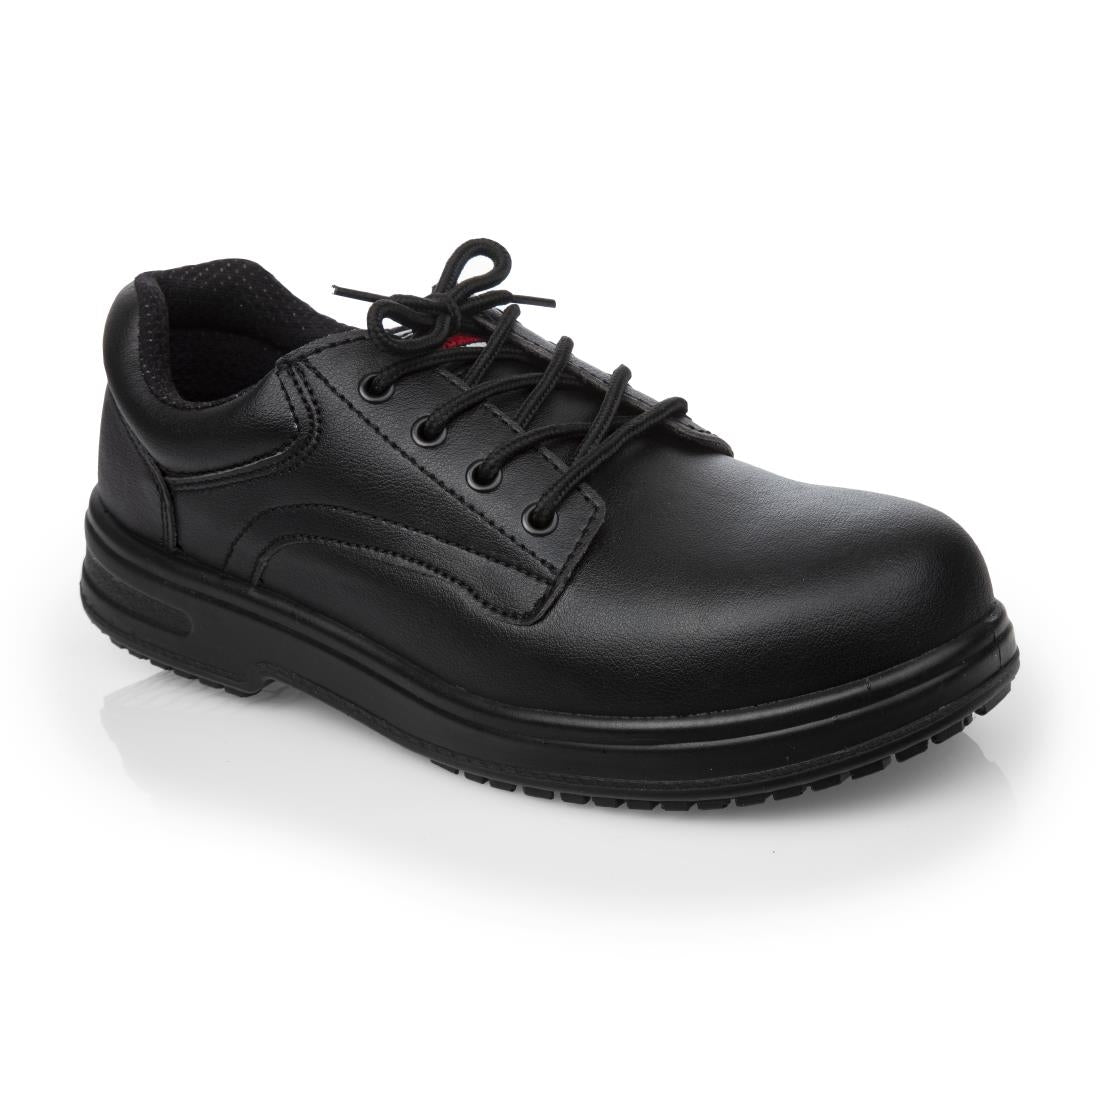 BB497-38 Slipbuster Basic Toe Cap Safety Shoes Black 38 JD Catering Equipment Solutions Ltd